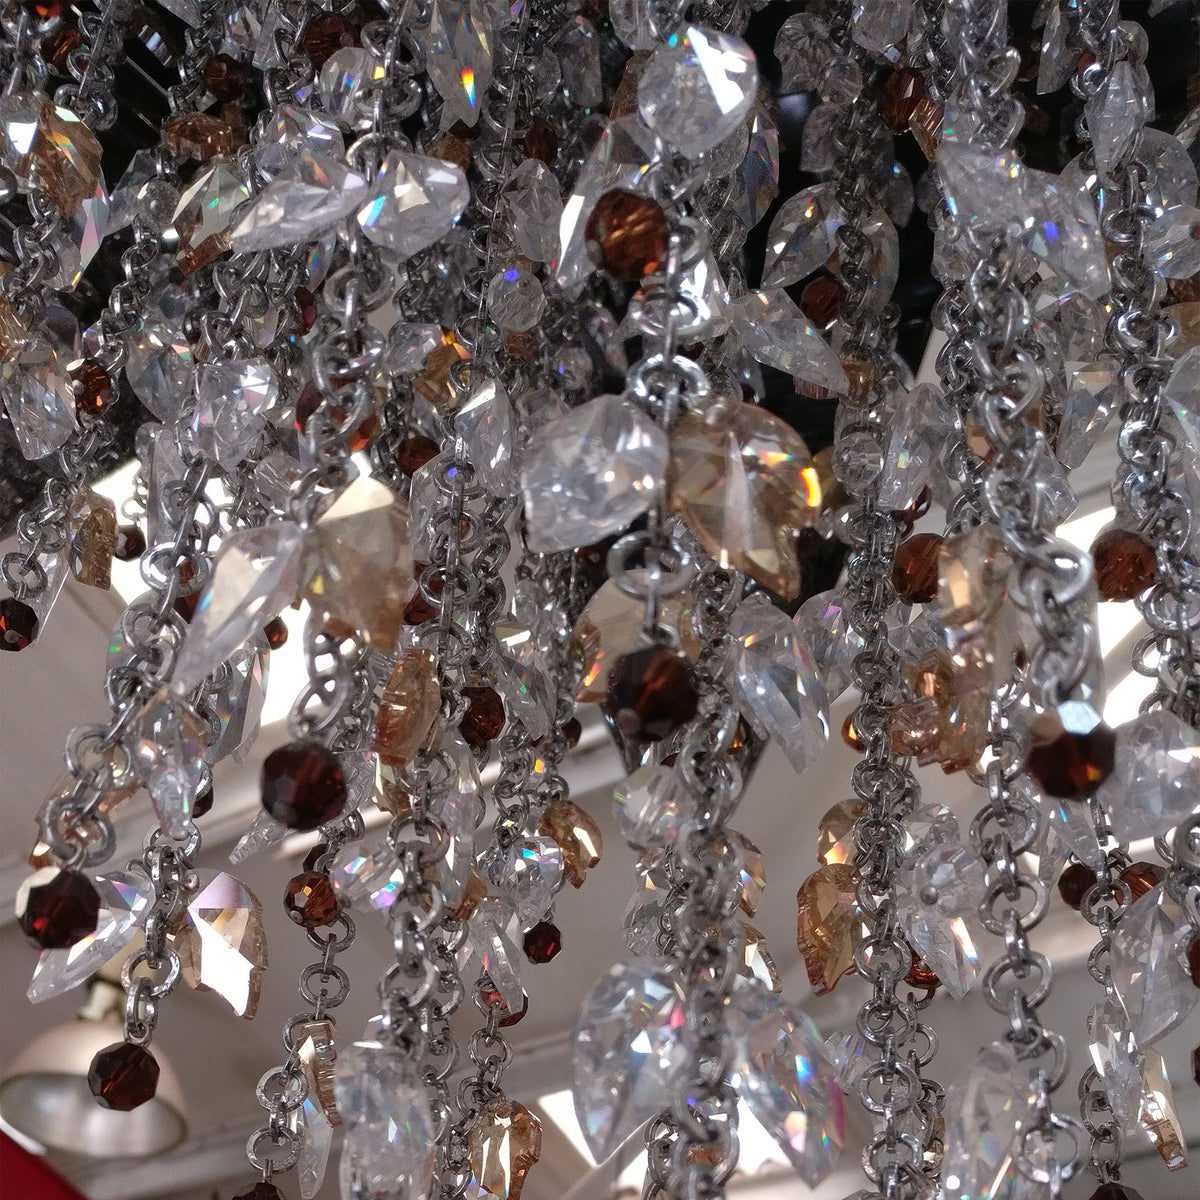 Reclaimed Beby Italy Bouquet Crystal Pendant Light | The Architectural Forum